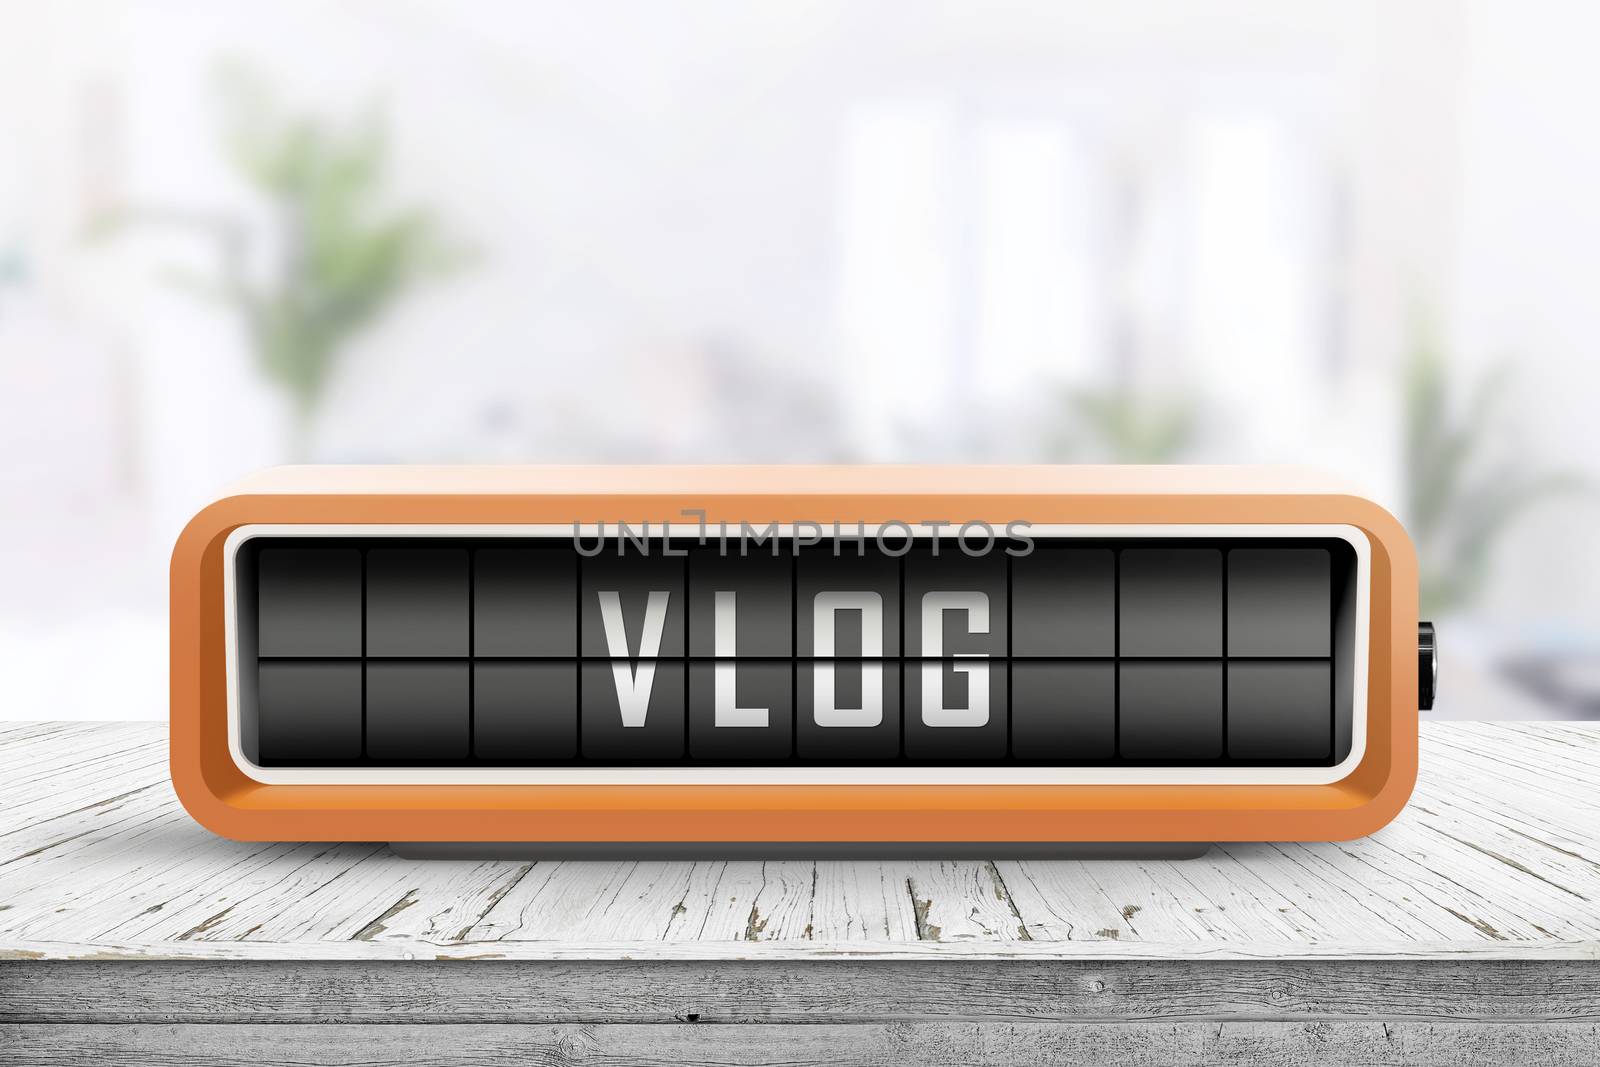 Vlog word written on a retro device in orange color in a bright room